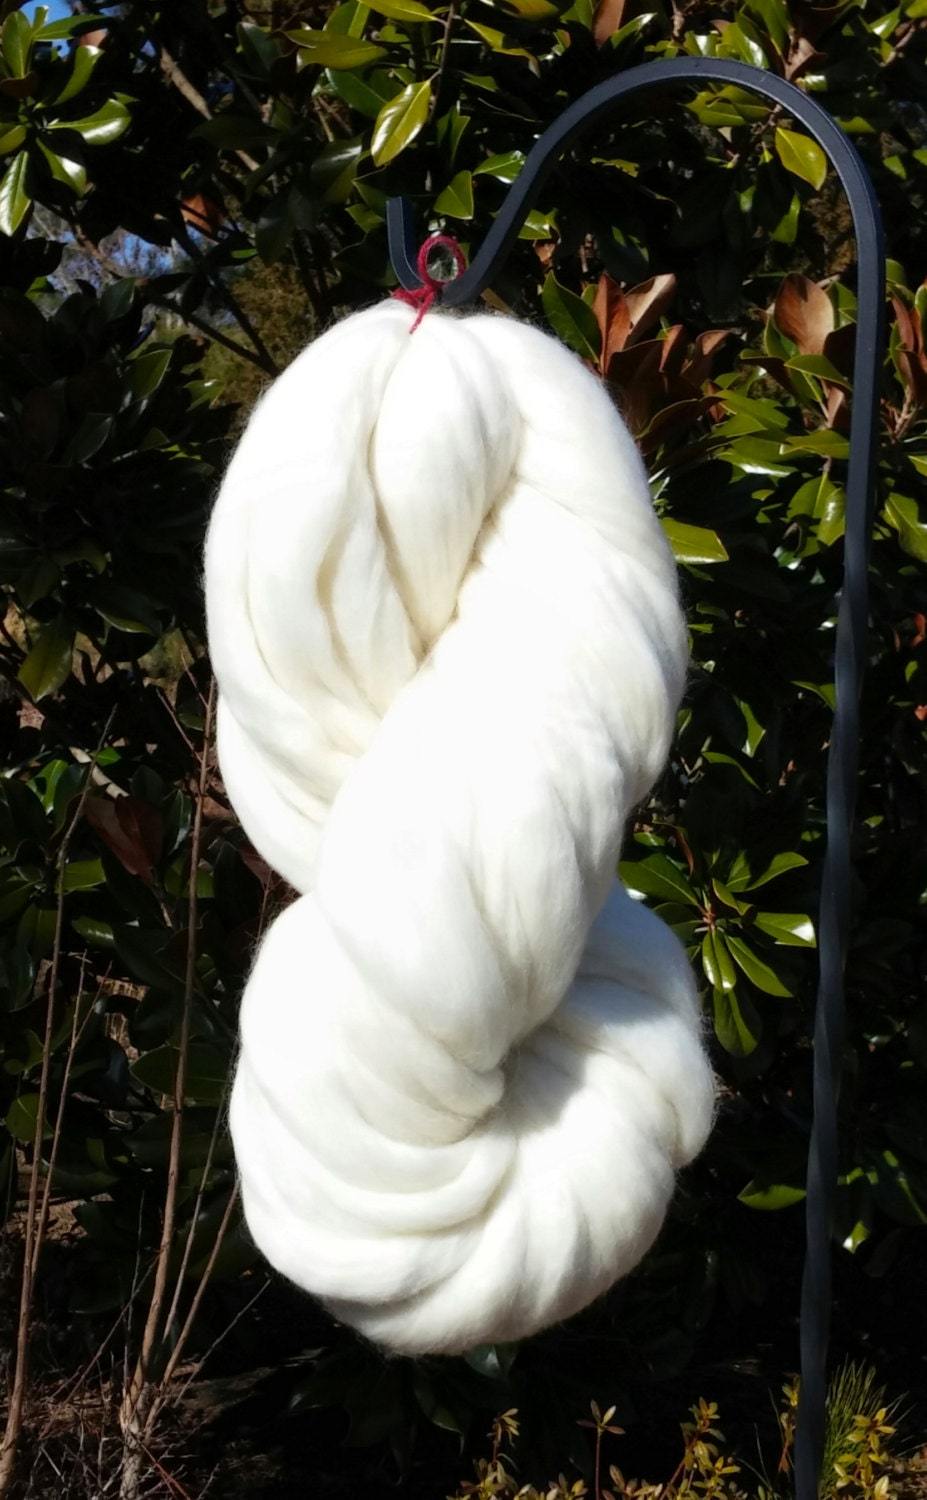 Falkland white wool top 1lb for spinning, dying, crafts, felting, weaving tapestry, knitting etc..Beautiful high quality!